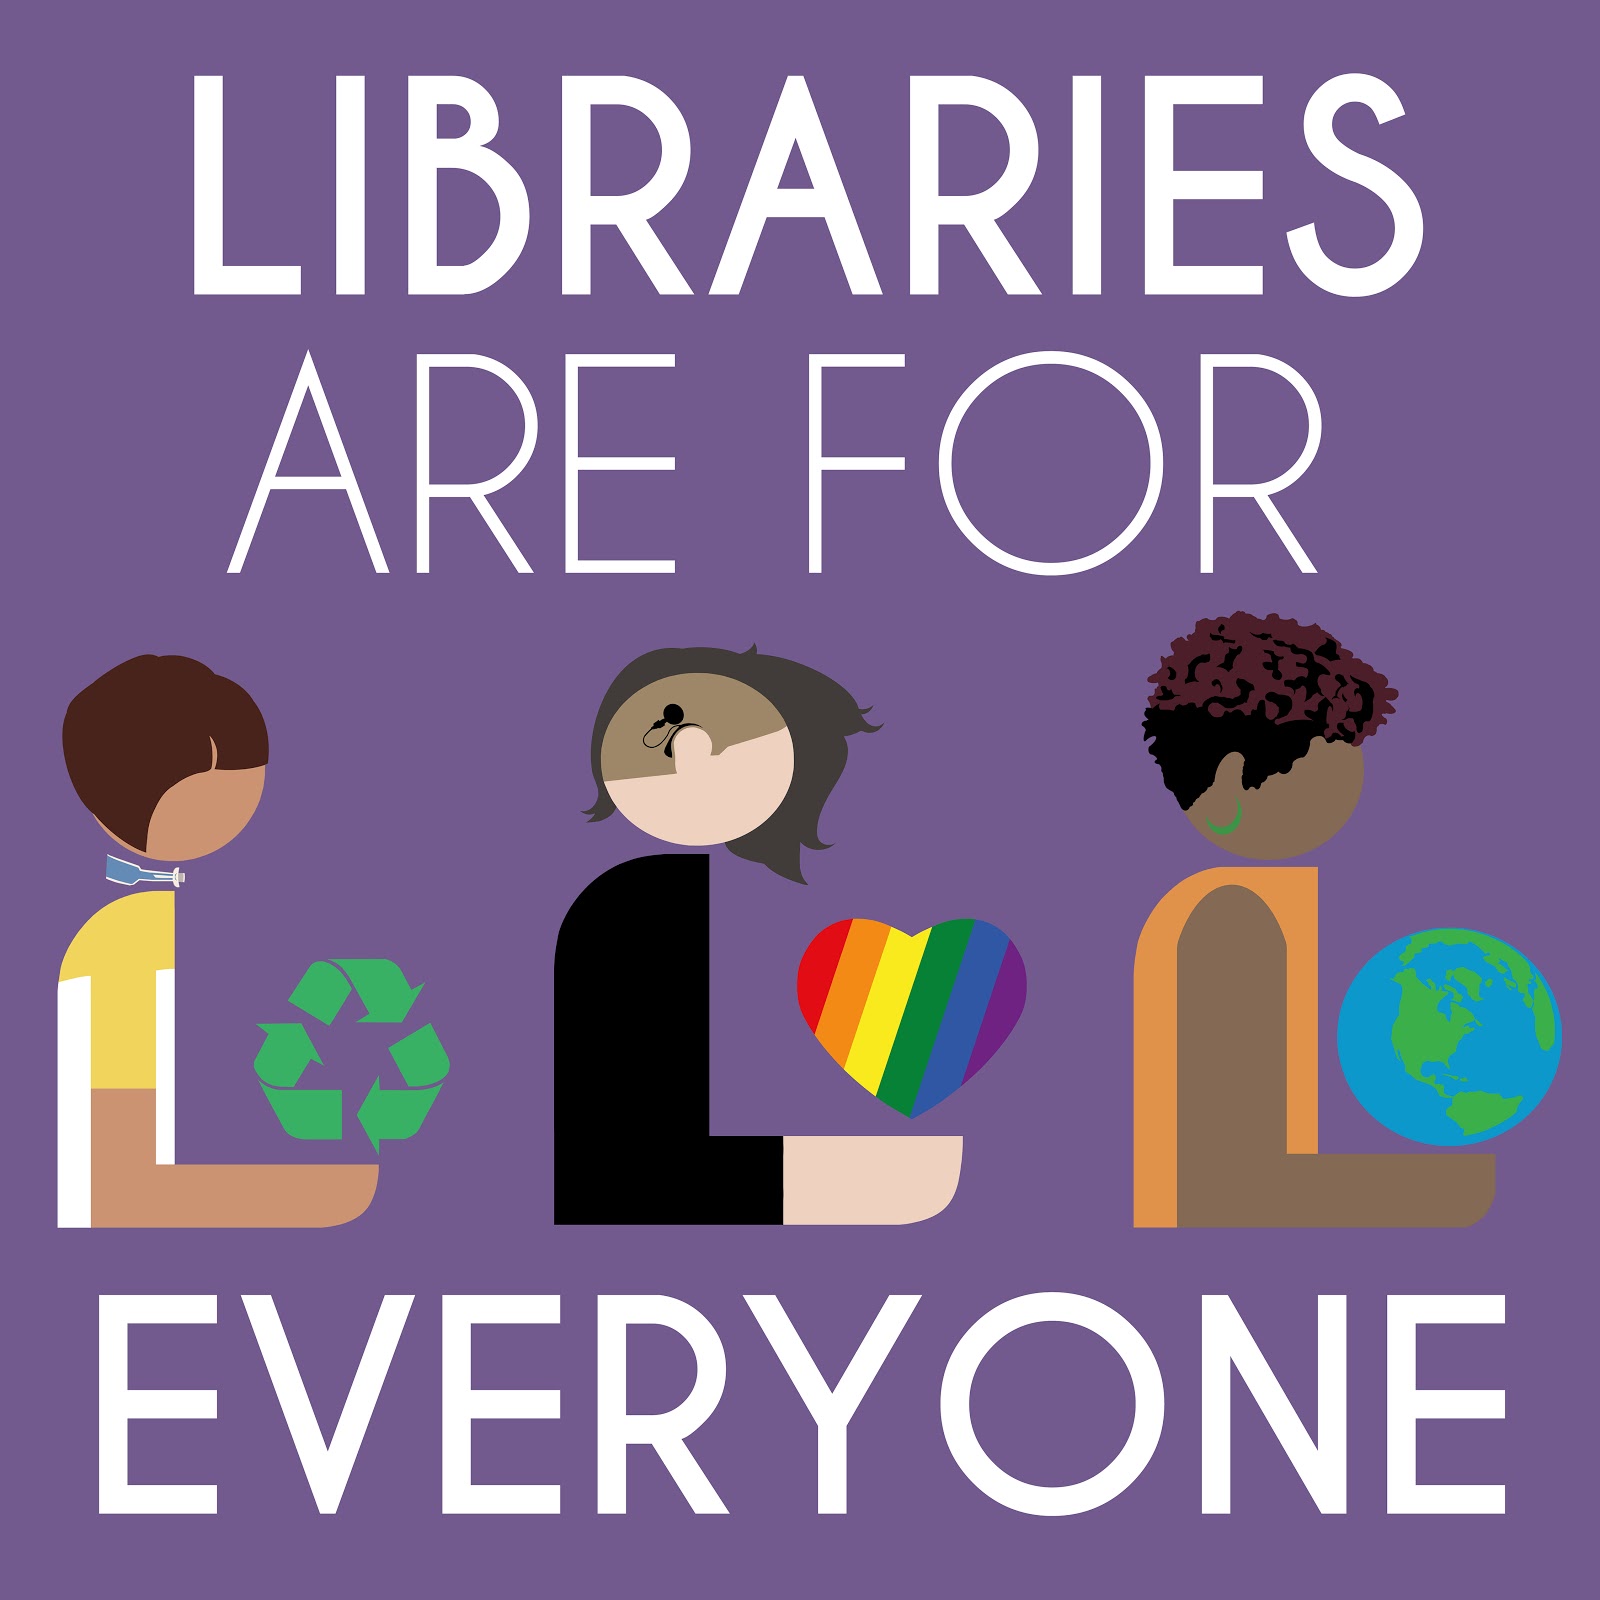 Libraries are for Everyone